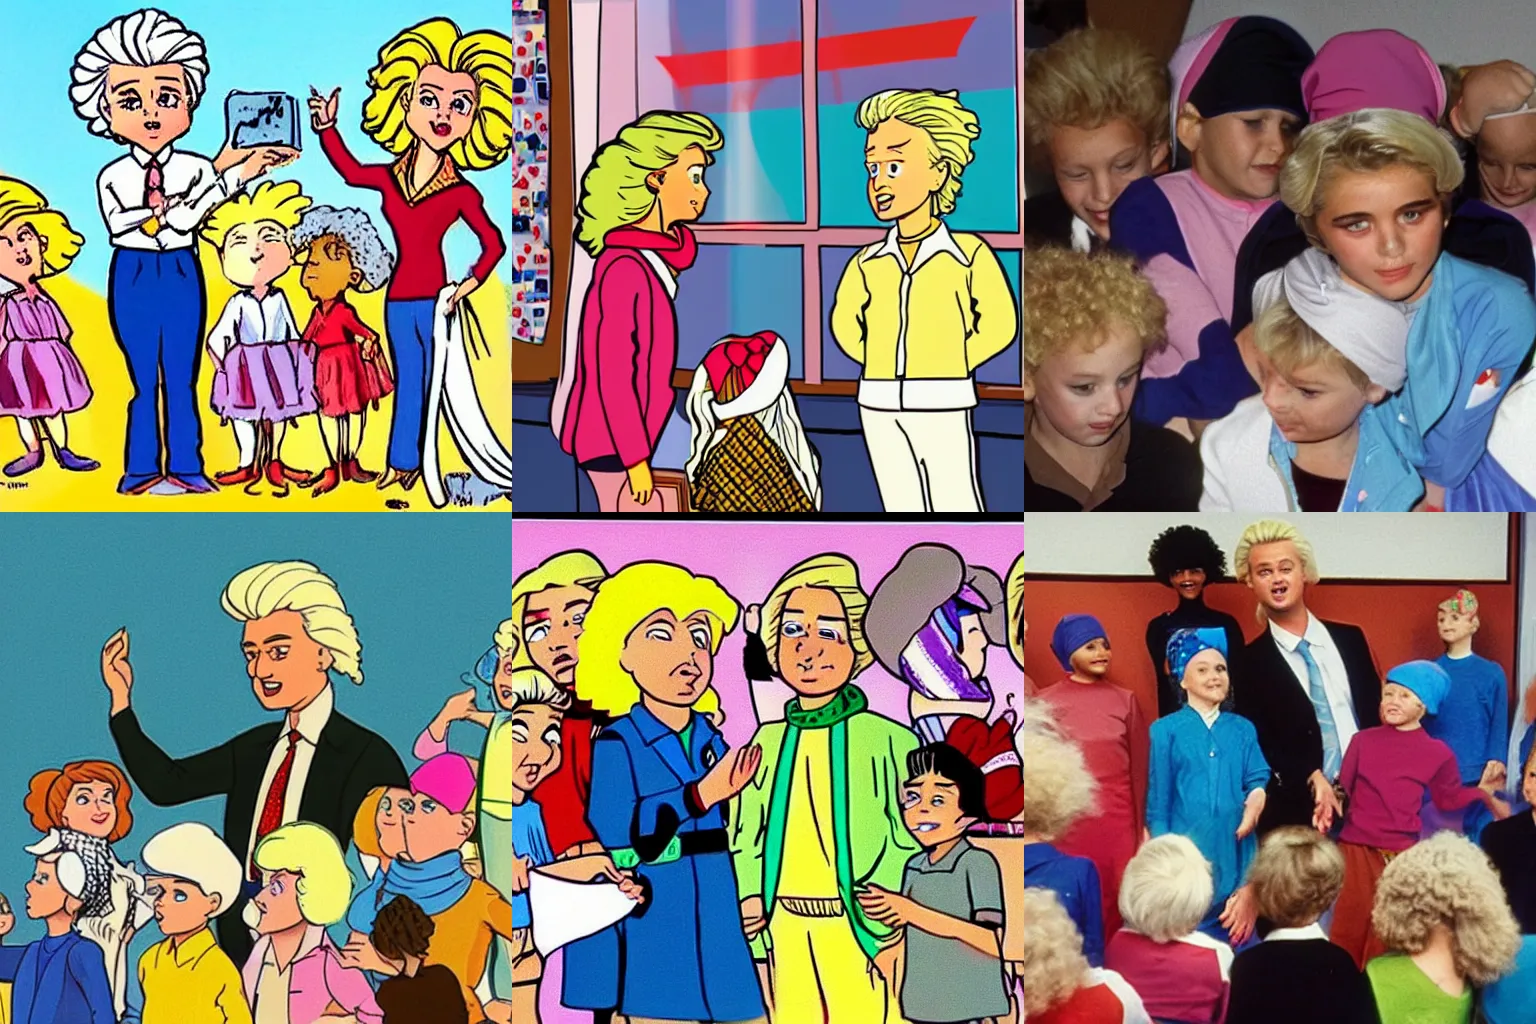 Prompt: geert wilders teaching children about headscarves in the style of a vhs - taped 8 0's cartoon character